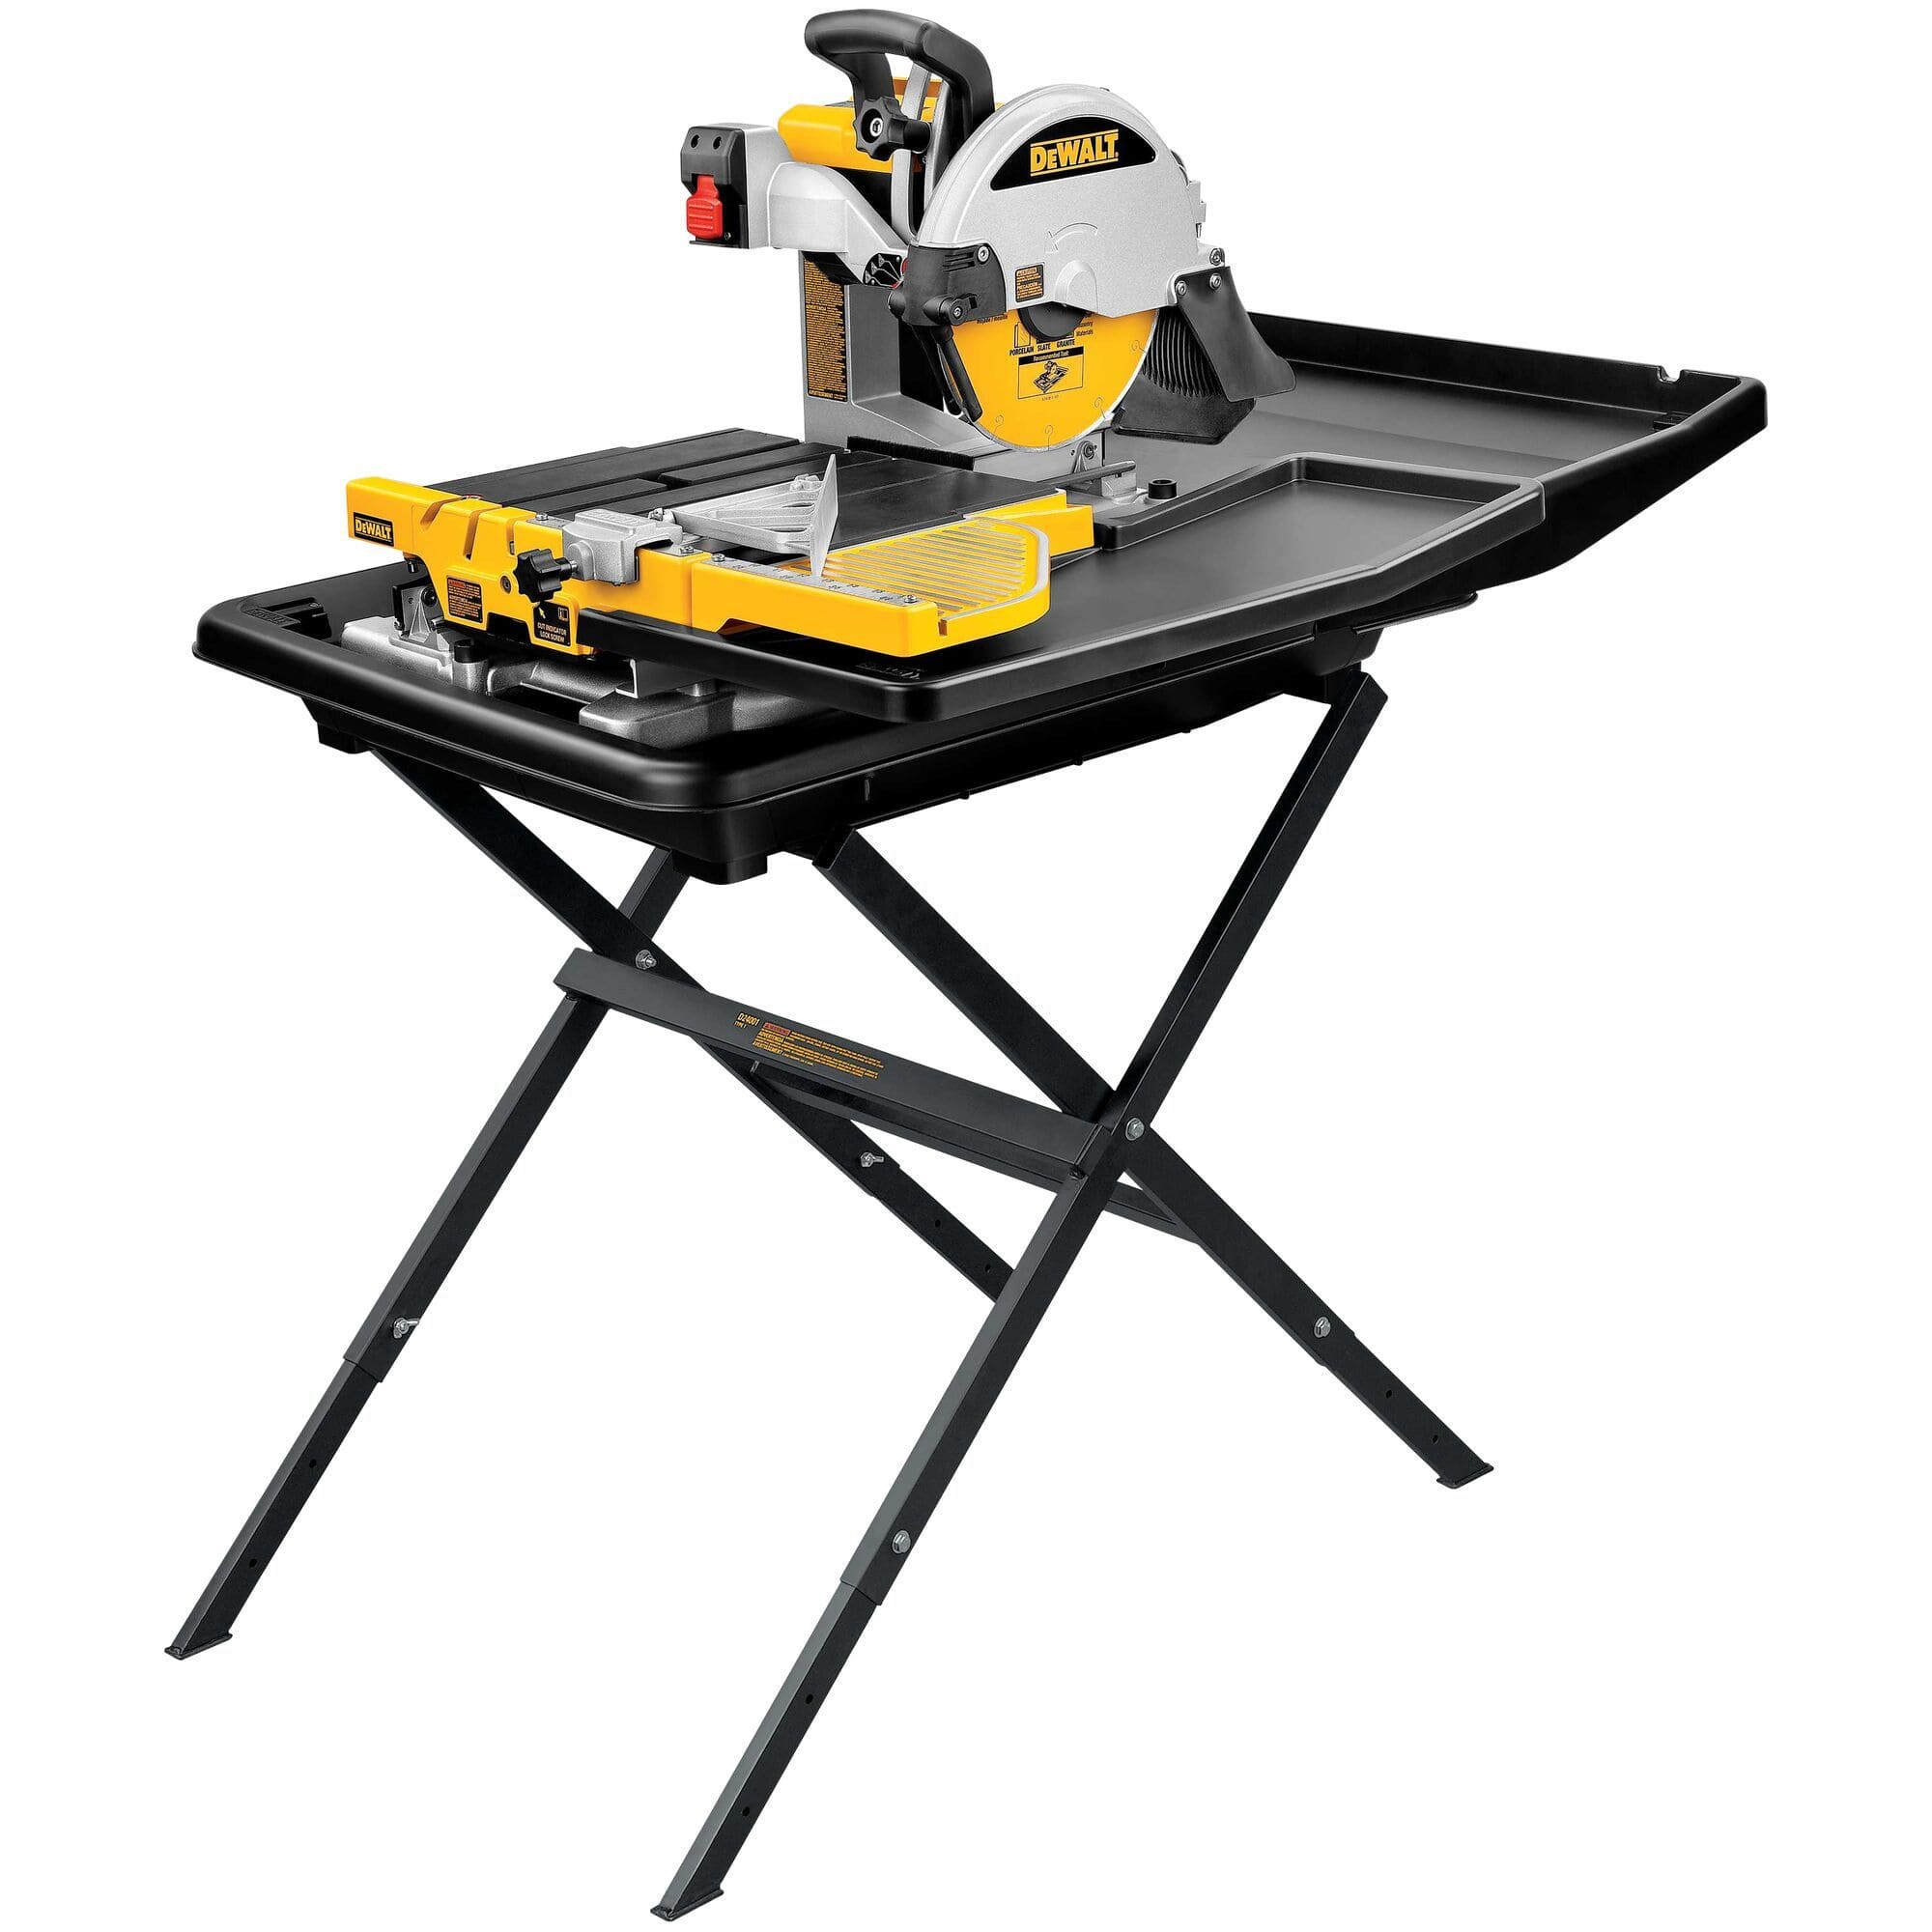 DEWALT D24000S-A 10-in Portable Wet Tile Saw with Stand